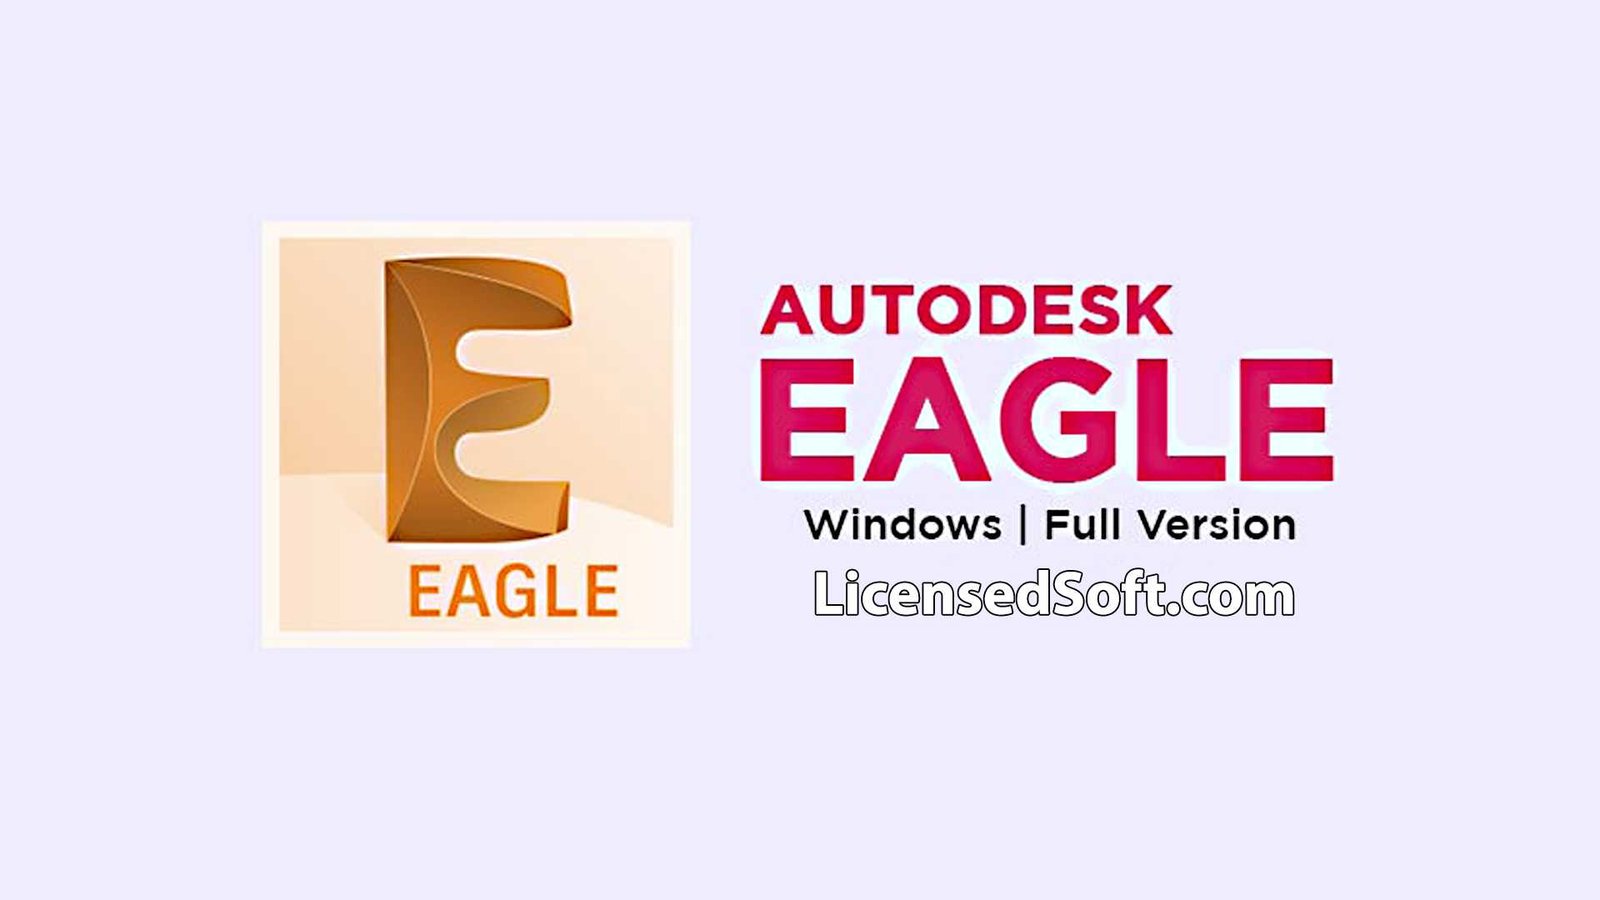 Autodesk EAGLE Premium 9.6.2 Cover Image By LicensedSoft